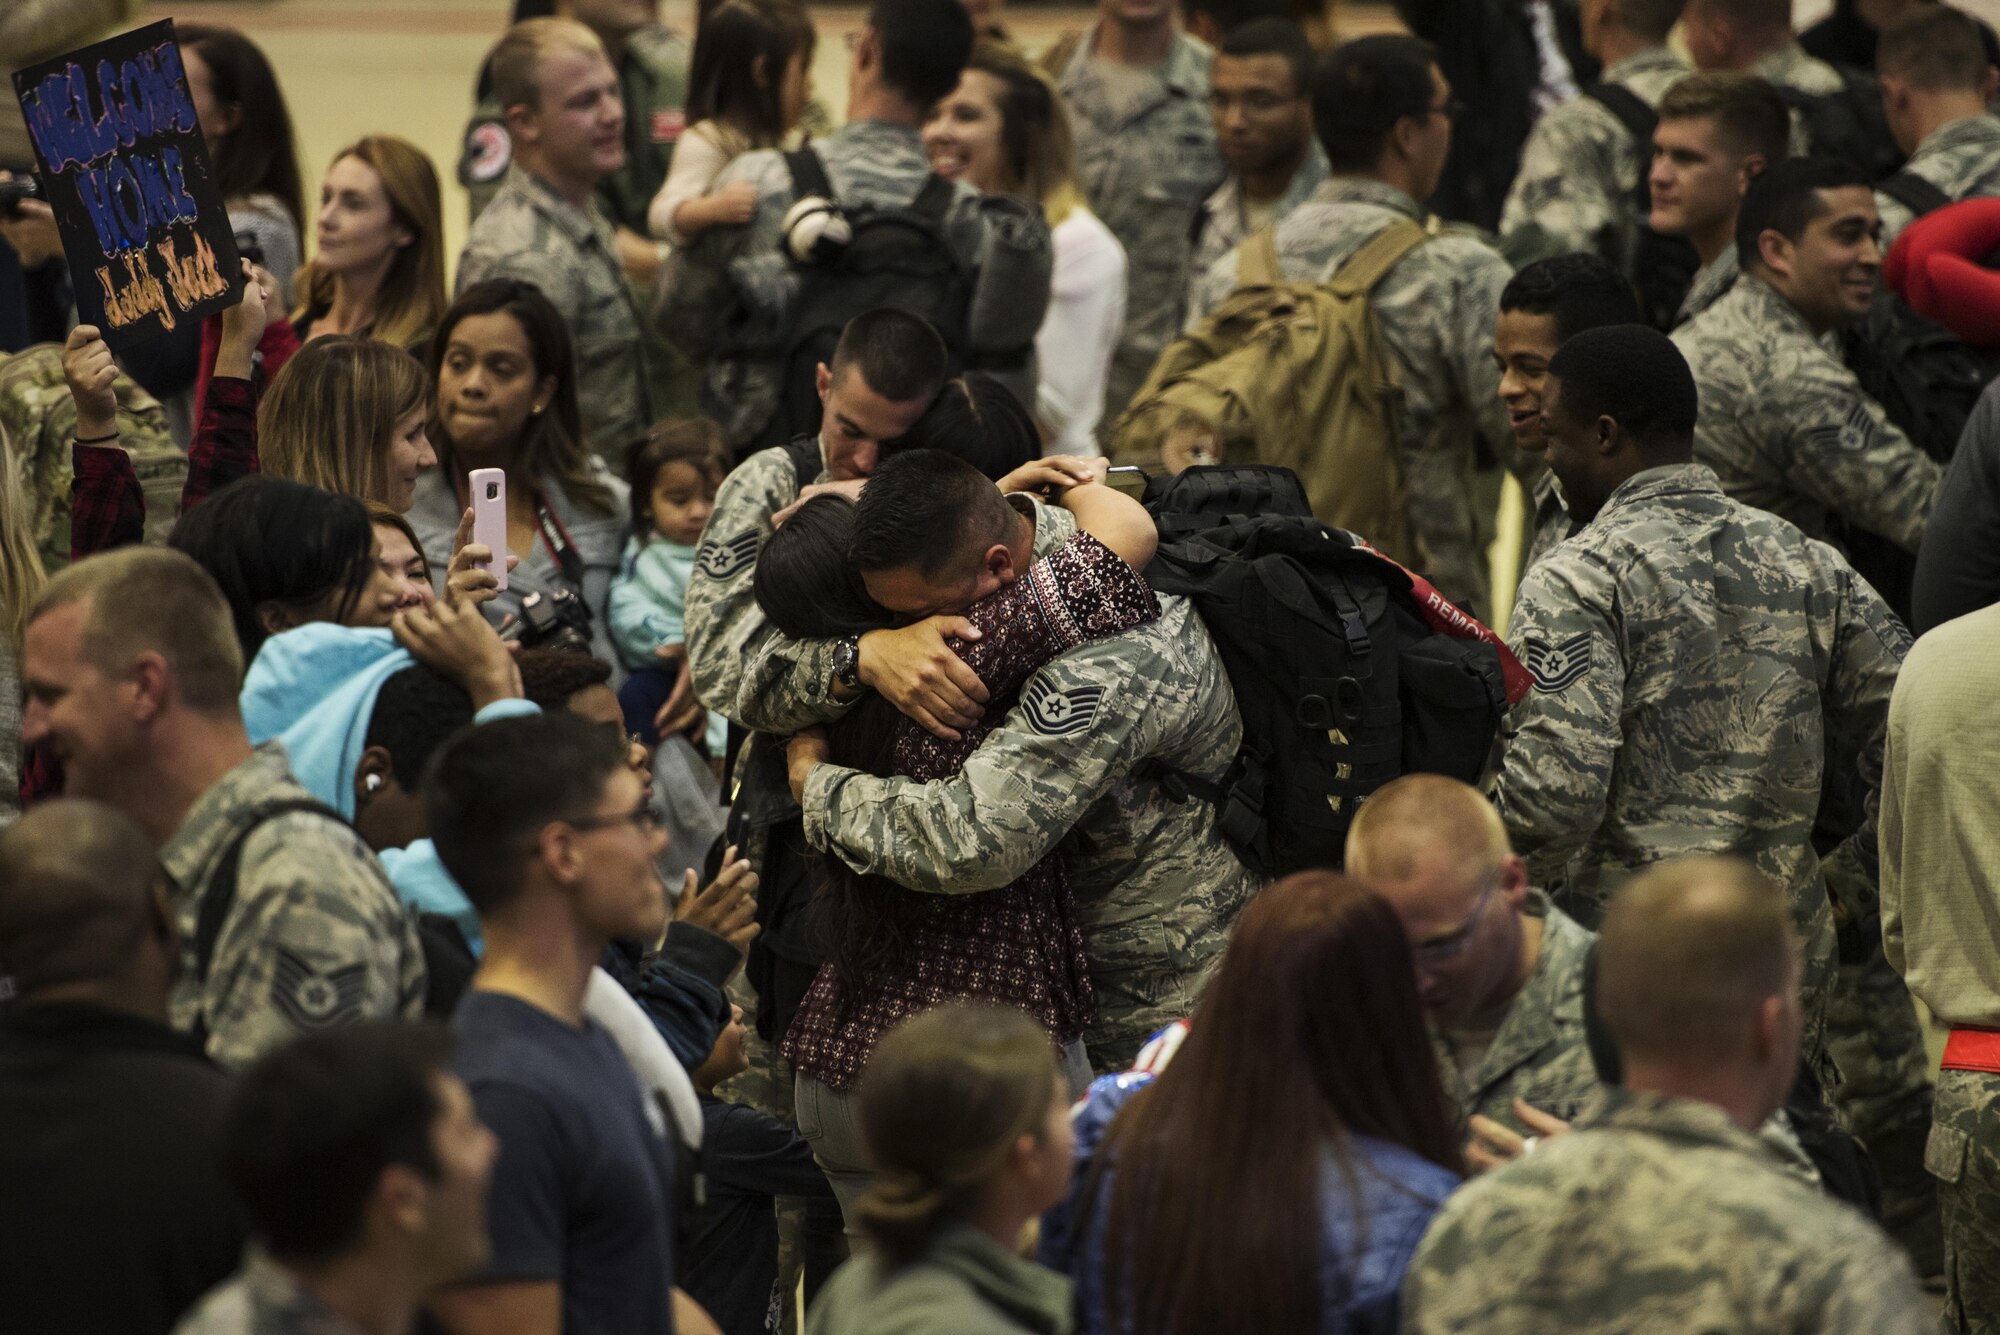 Airmen assigned to the 480th Expeditionary Fighter Squadron reunite with their loved ones during the squadron’s
return to Spangdahlem Air Base, Germany, Oct. 12, 2016. Approximately 300 of the squadron’s Airmen, who serve
in flight, maintenance or support roles for the F-16 Fighting Falcon fighter aircraft, completed a six-month
deployment to Southwest Asia by providing close air support and dynamic targeting operations in support of
Operation Inherent Resolve. (U.S. Air Force photo by Staff Sgt. Jonathan Snyder)